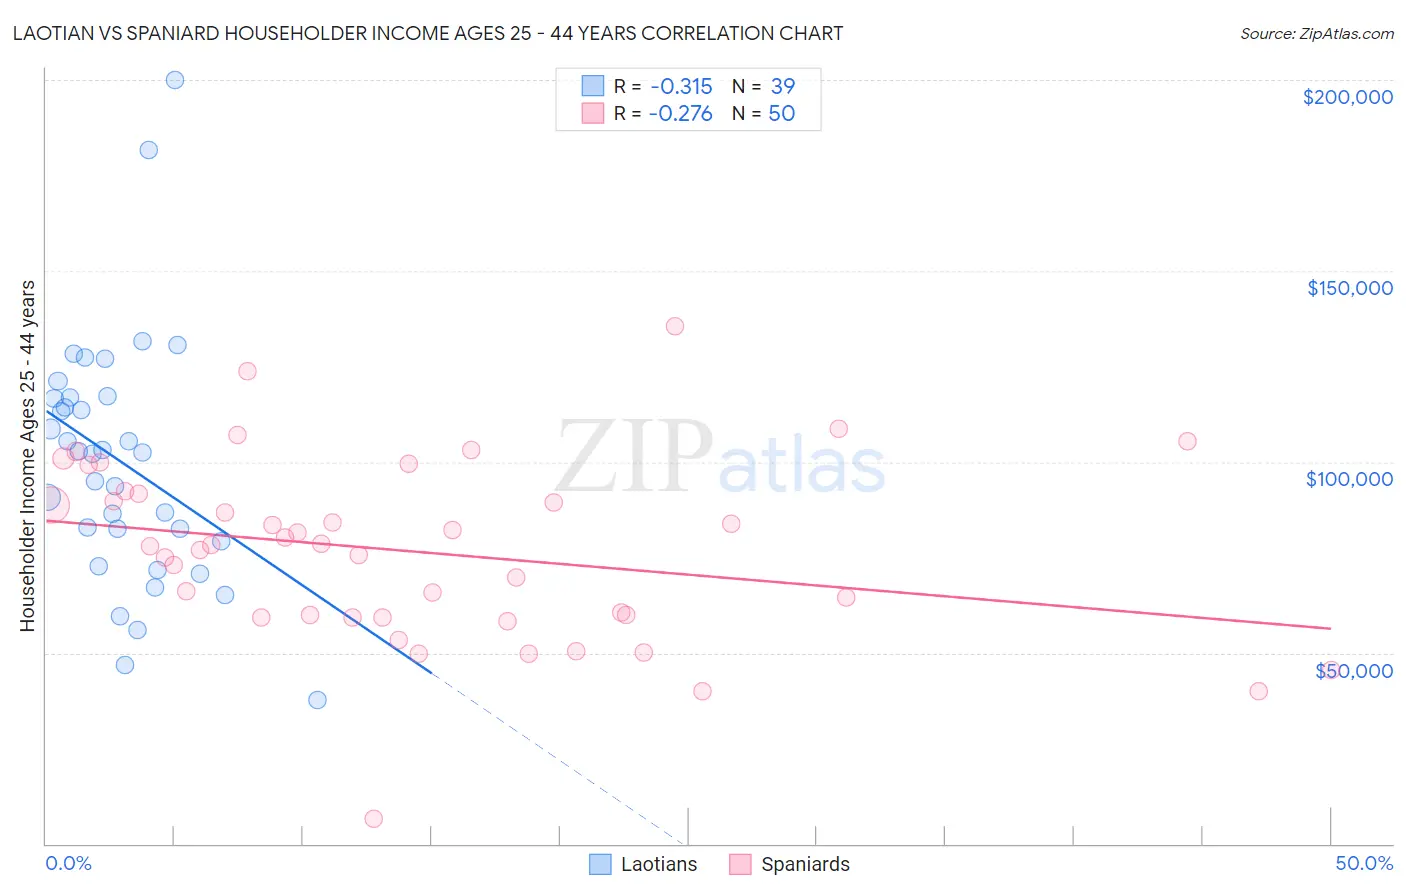 Laotian vs Spaniard Householder Income Ages 25 - 44 years